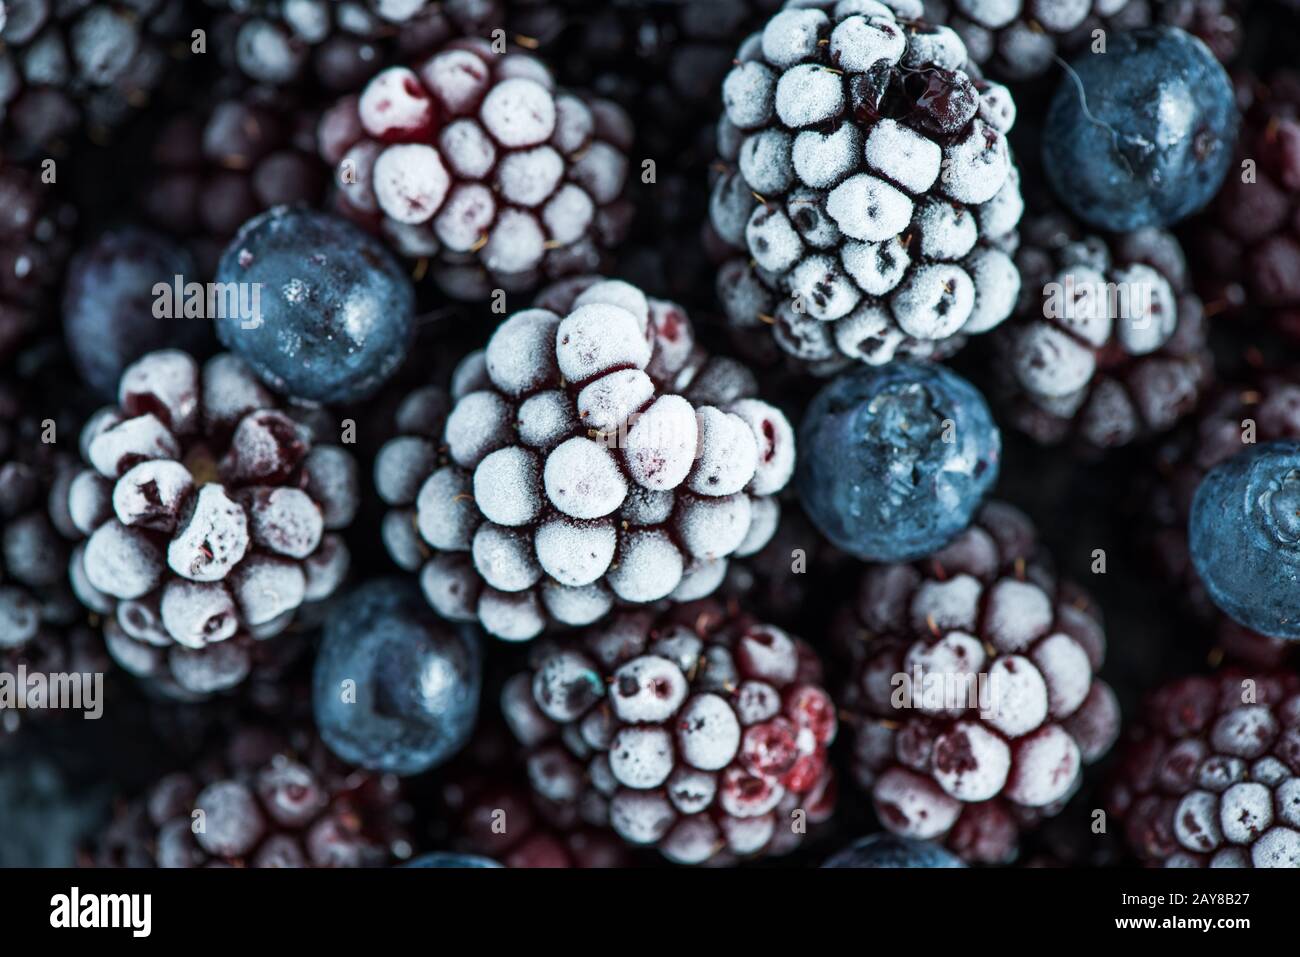 close view on frozen Blackberry fruits Stock Photo